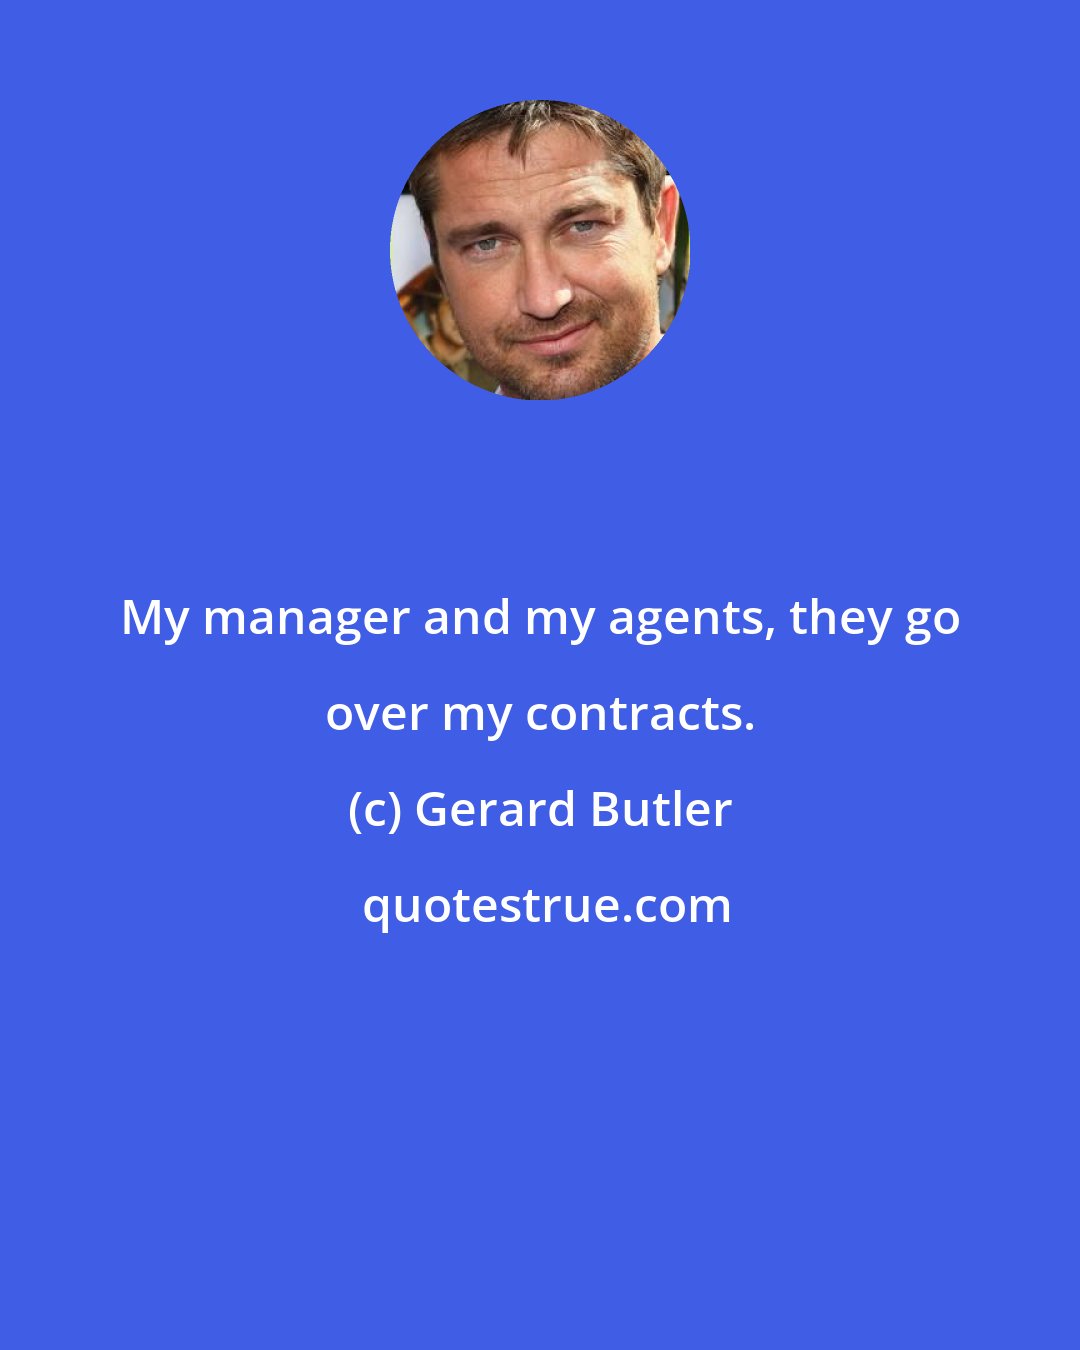 Gerard Butler: My manager and my agents, they go over my contracts.